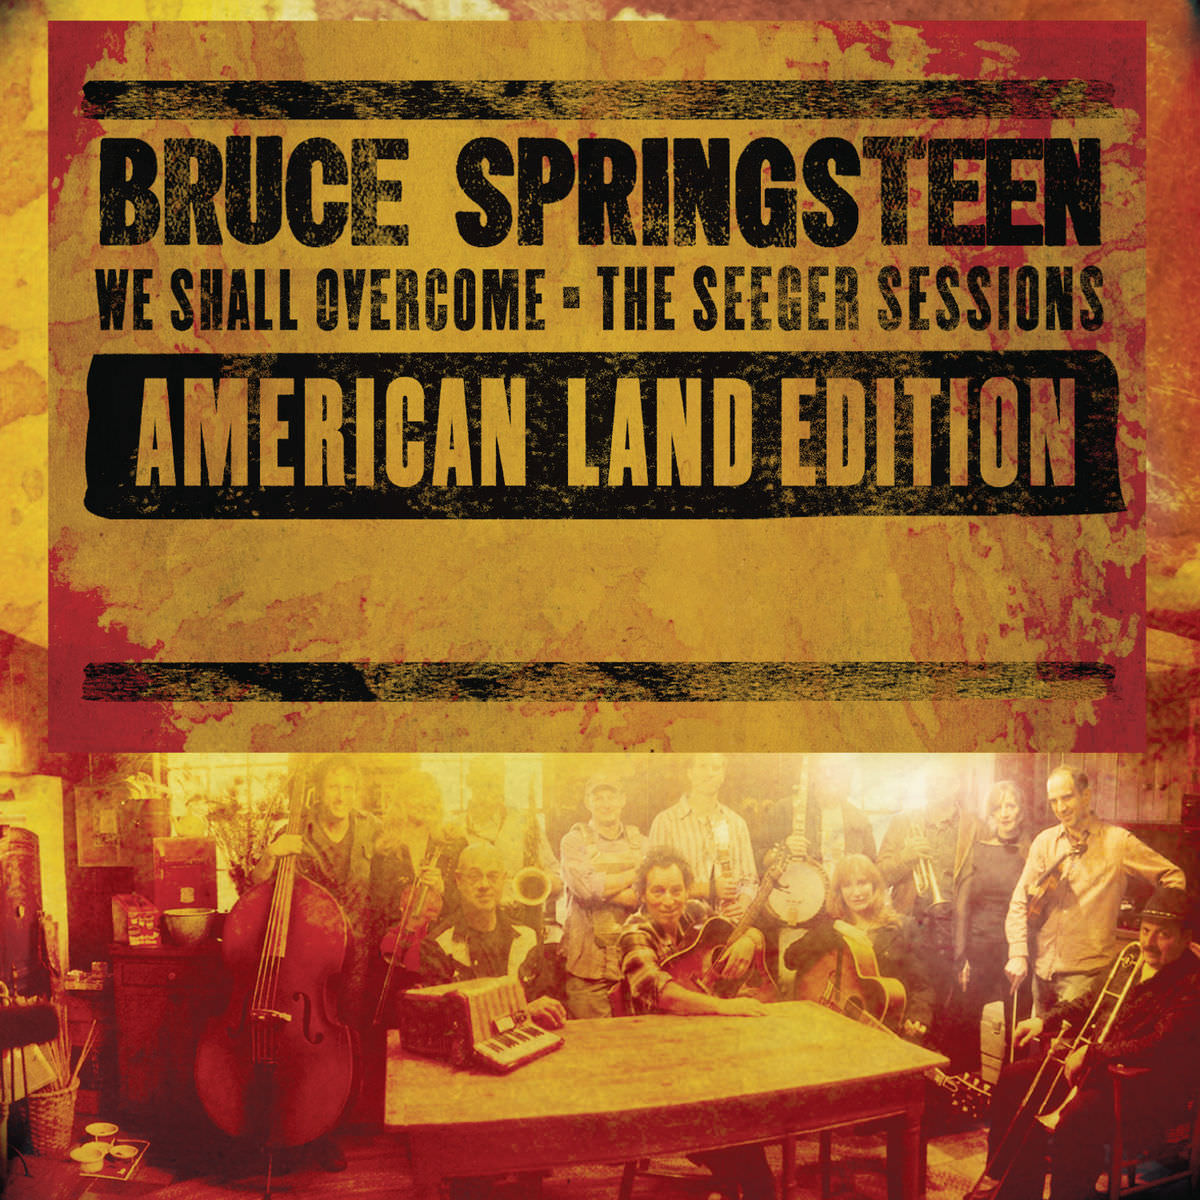 Bruce Springsteen – We Shall Overcome (The Seeger Sessions) [American Land Edition] (1998/2006/2018) [FLAC 24bit/44,1kHz]